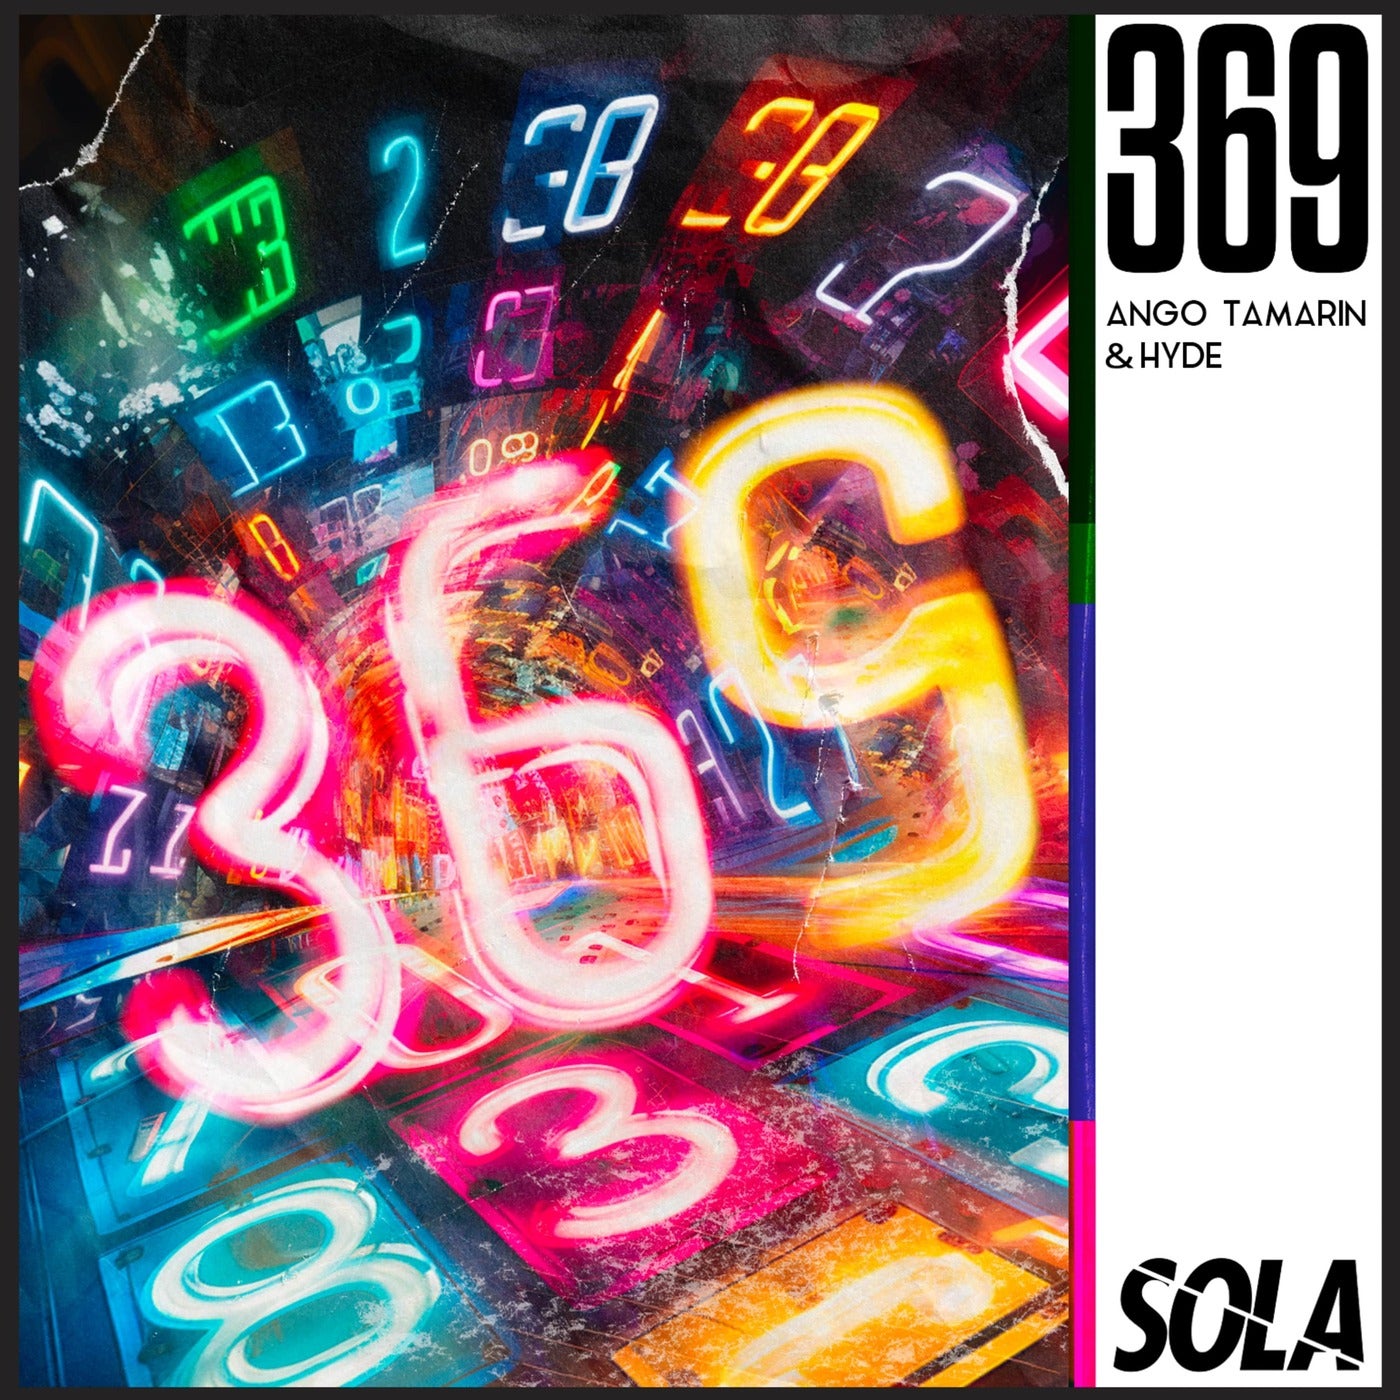 image cover: Ango Tamarin, Hyde (OFC) - 3,6,9 on Sola